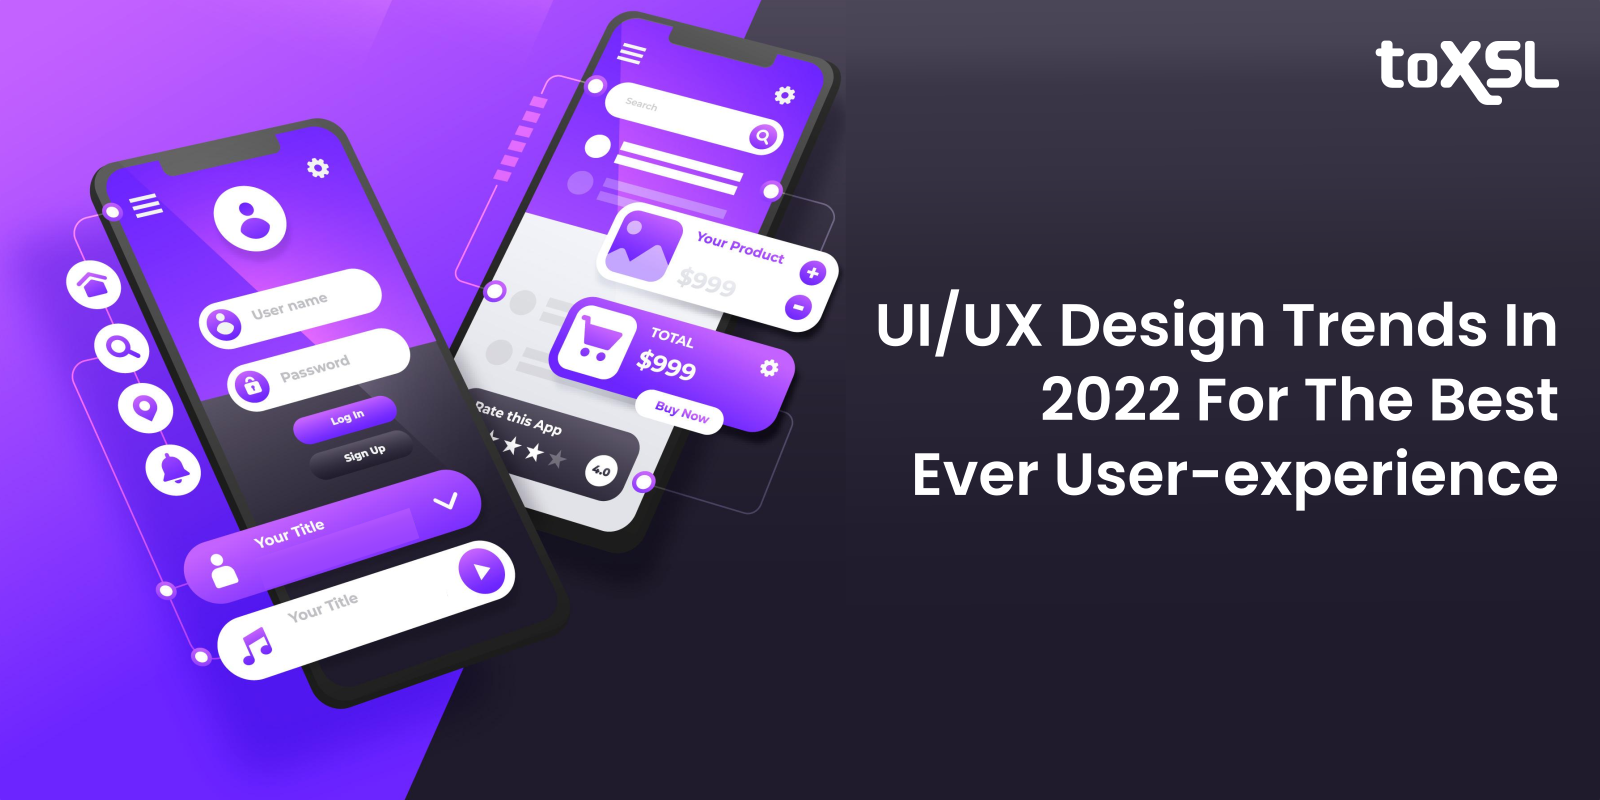 The State Of UI/UX Design Trends In 2022 For The Best Ever User-experience